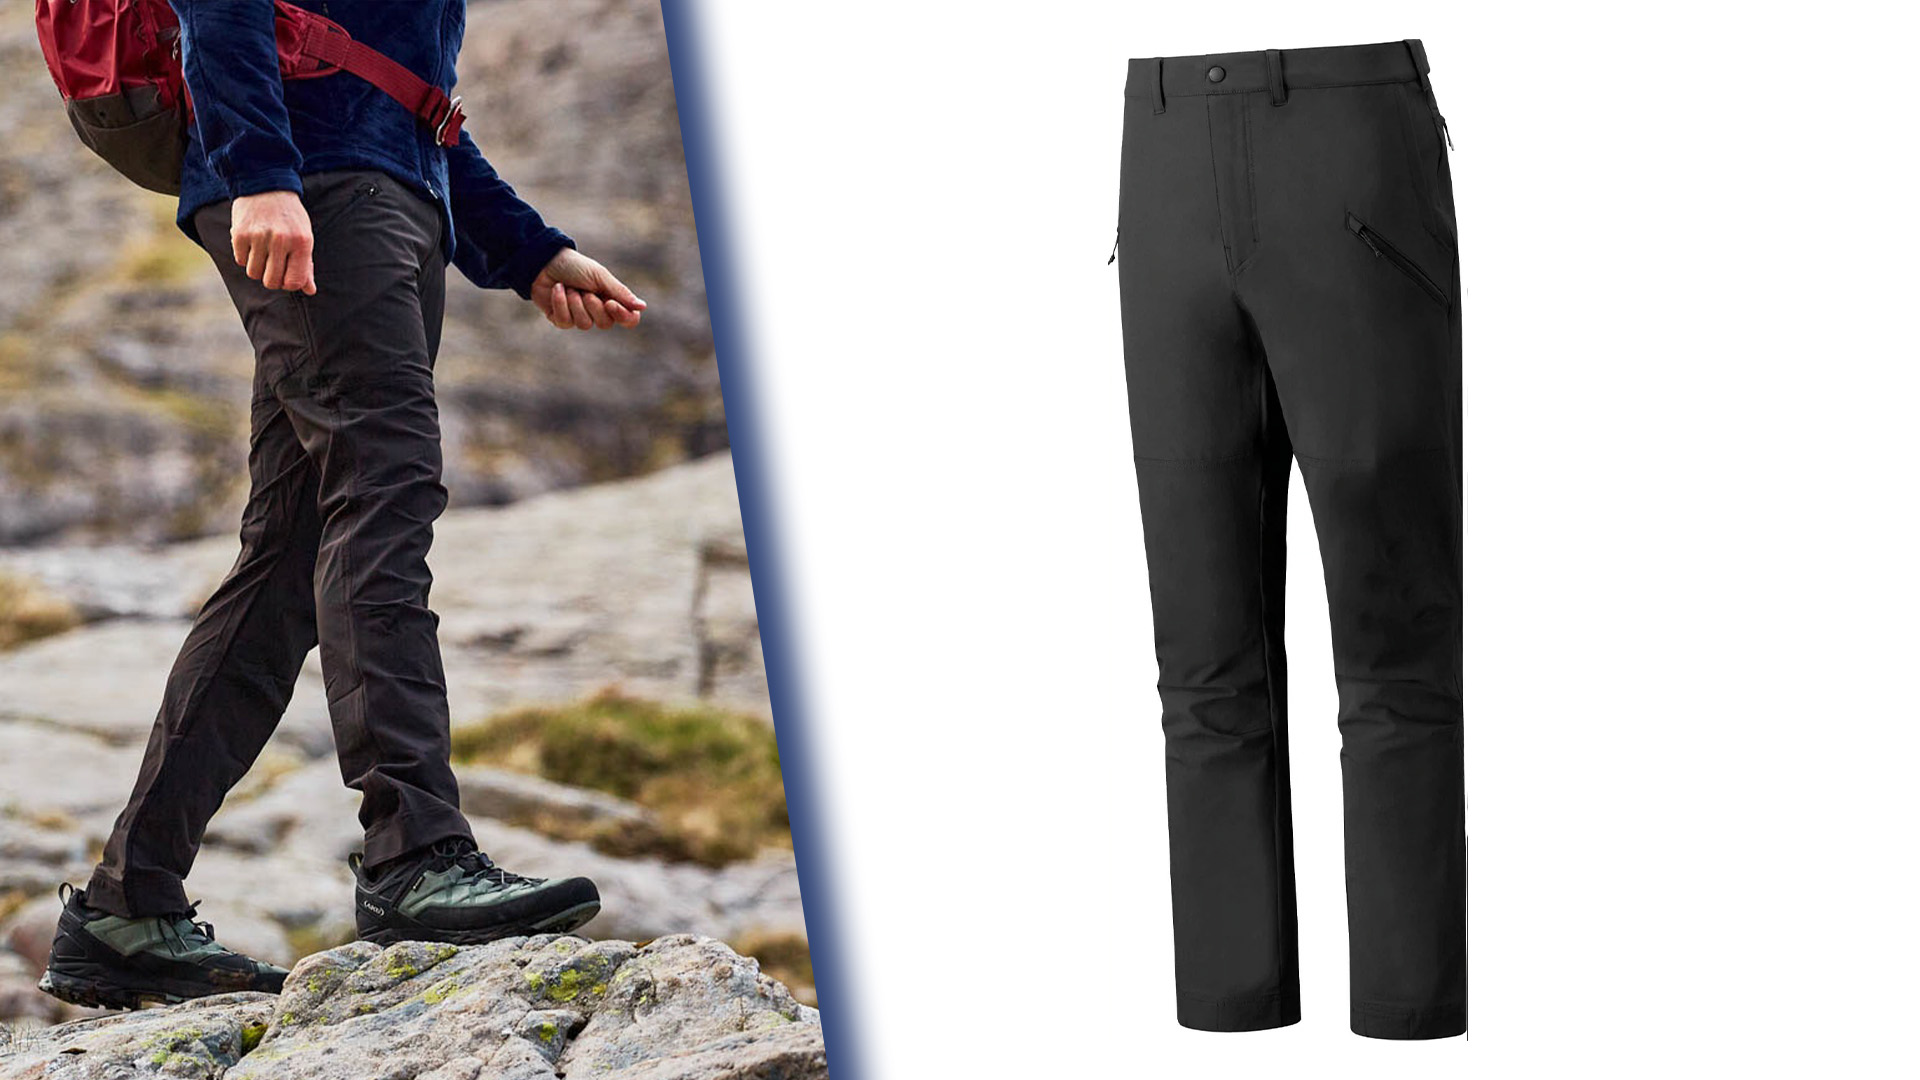 16 Best Hiking Pants for Women That Are Lightweight and Practical | Best  hiking pants, Hiking pants women, Pants for women